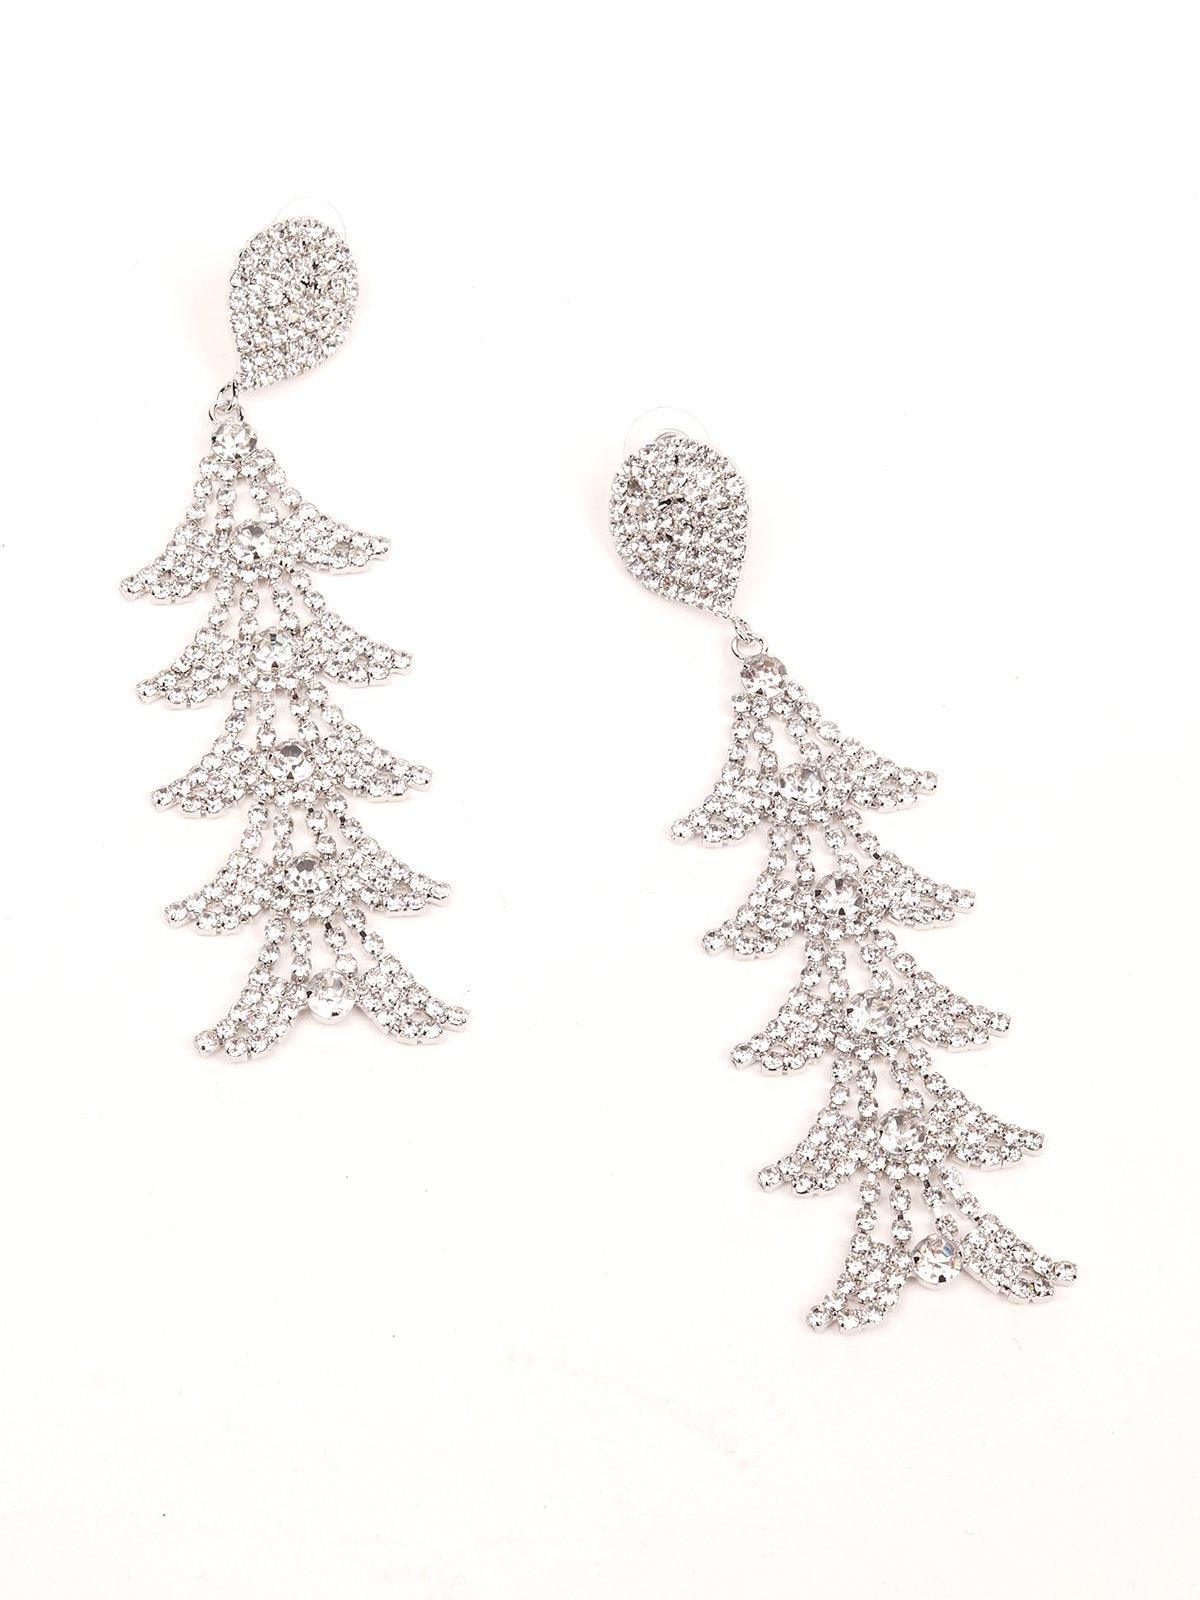 Gorgeous Crystal layered earrings - Odette